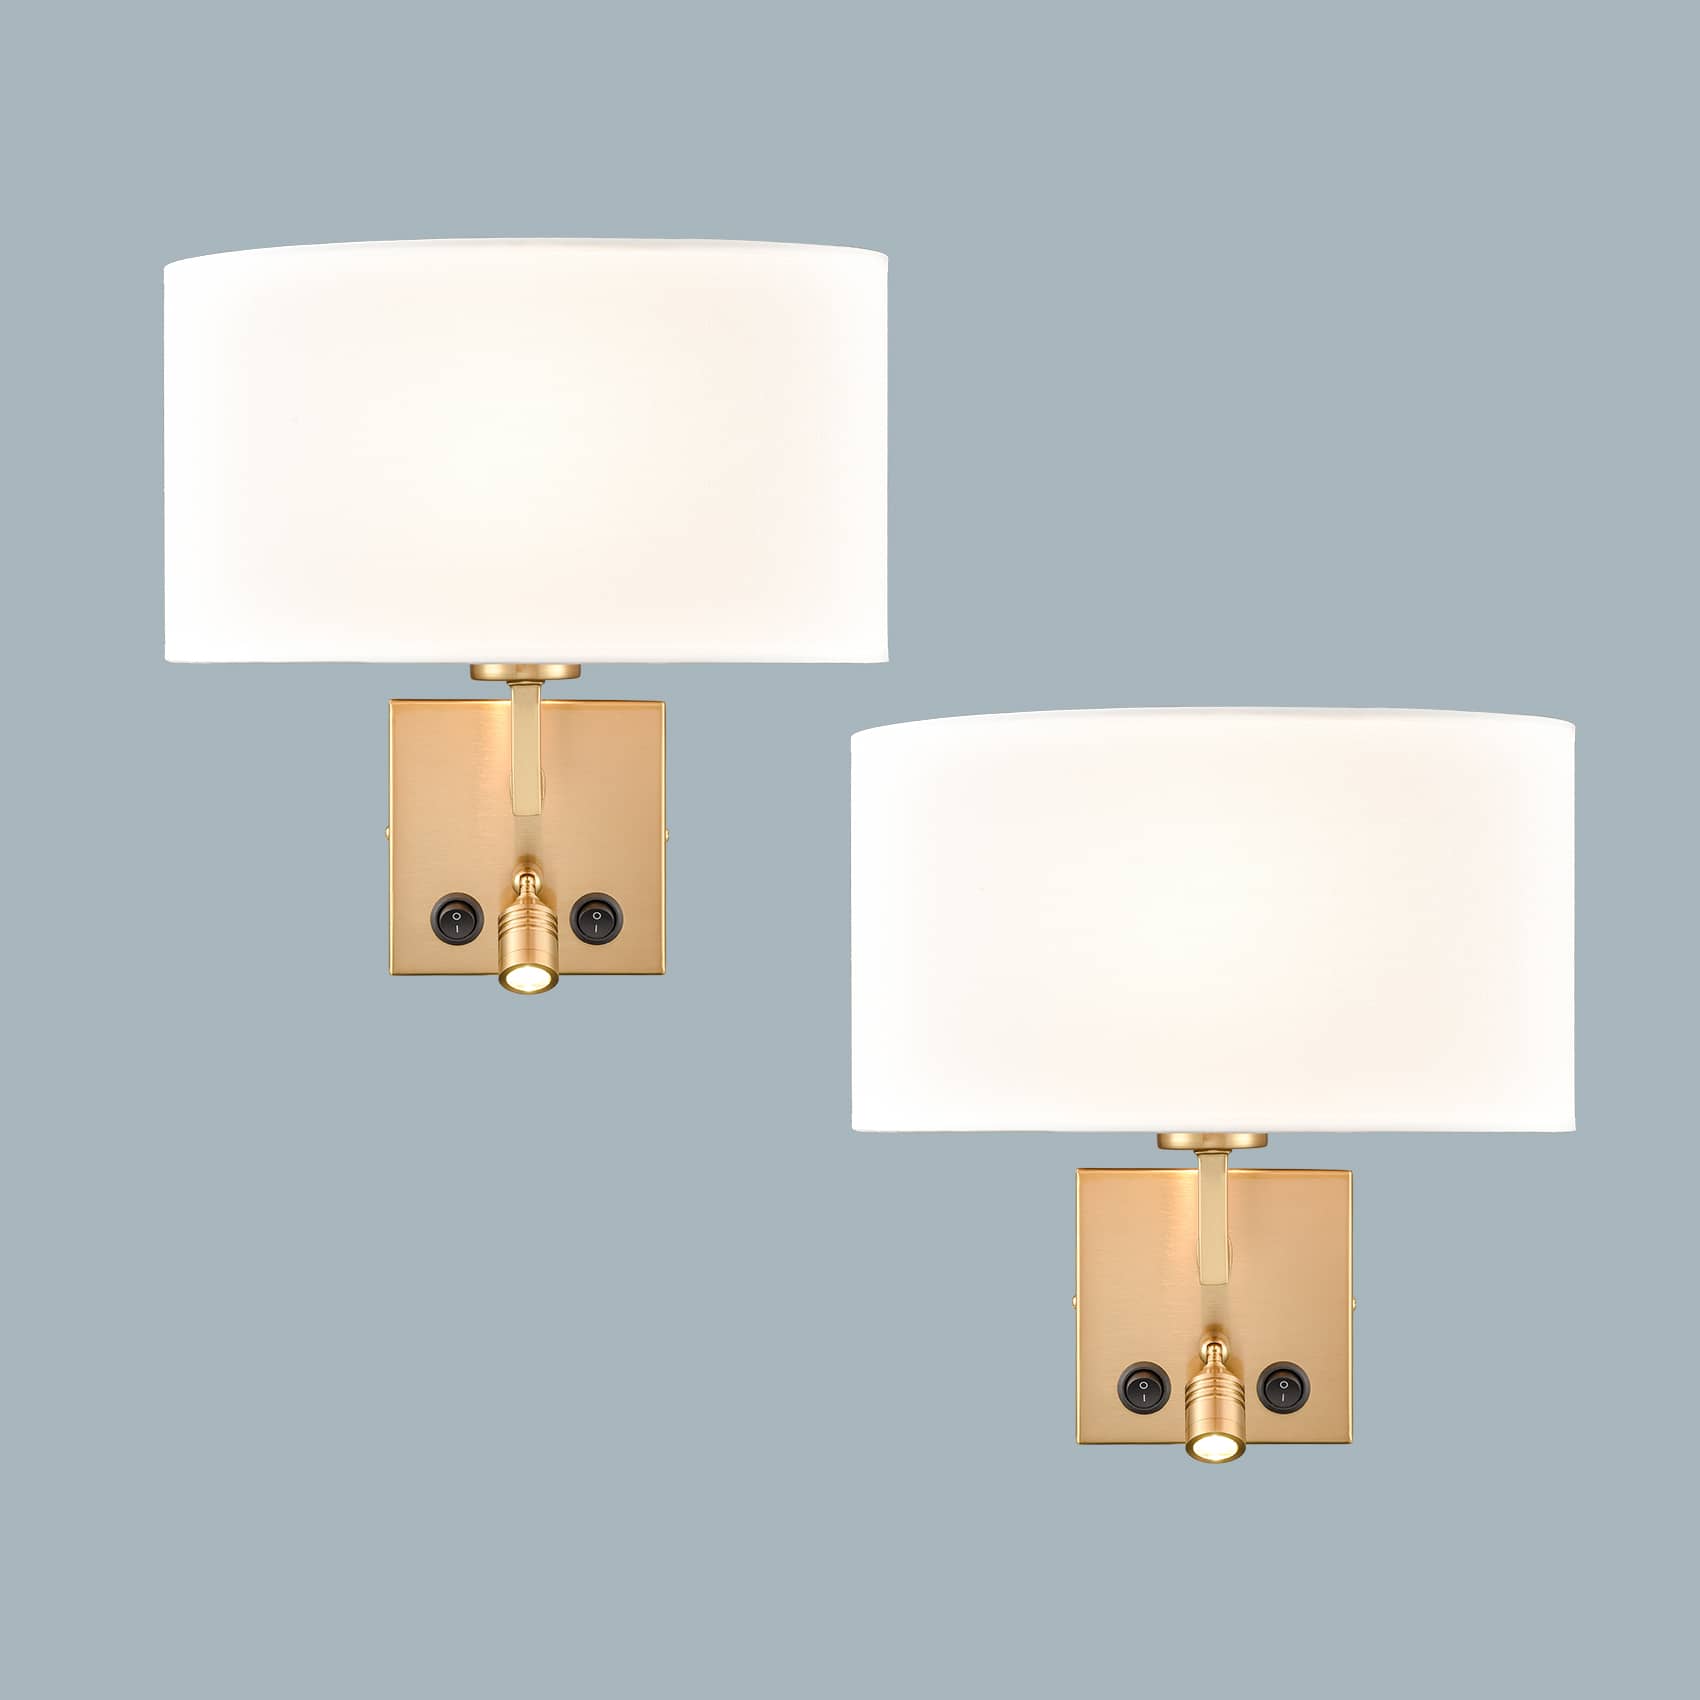 Modern Brass Wall Sconces with LED Reading Light USB Port